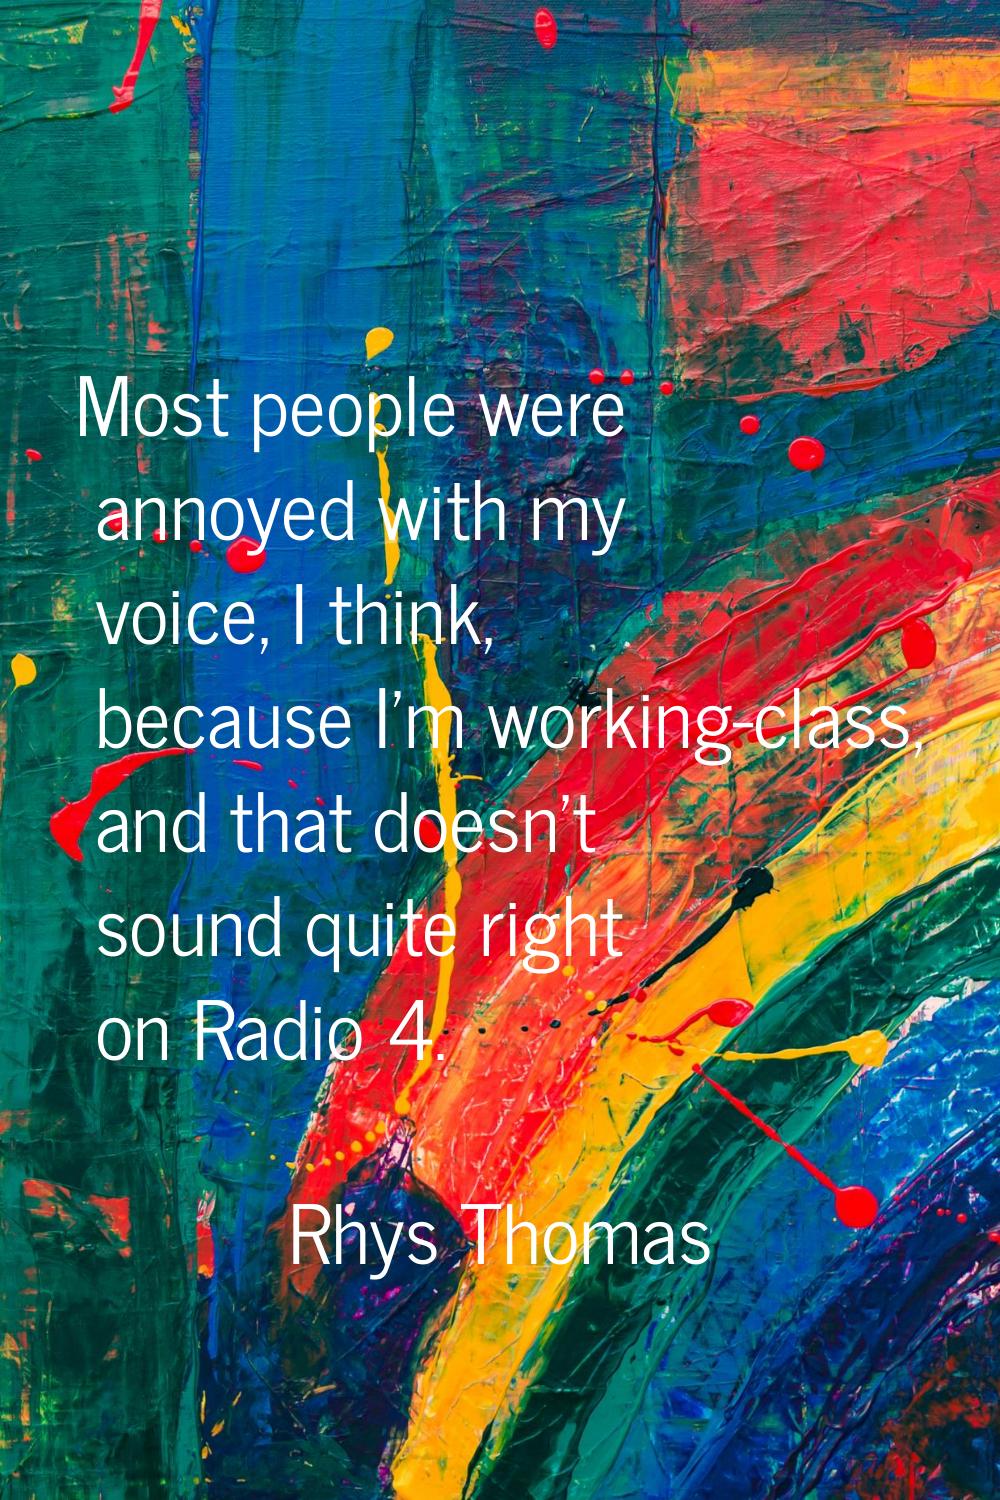 Most people were annoyed with my voice, I think, because I'm working-class, and that doesn't sound 